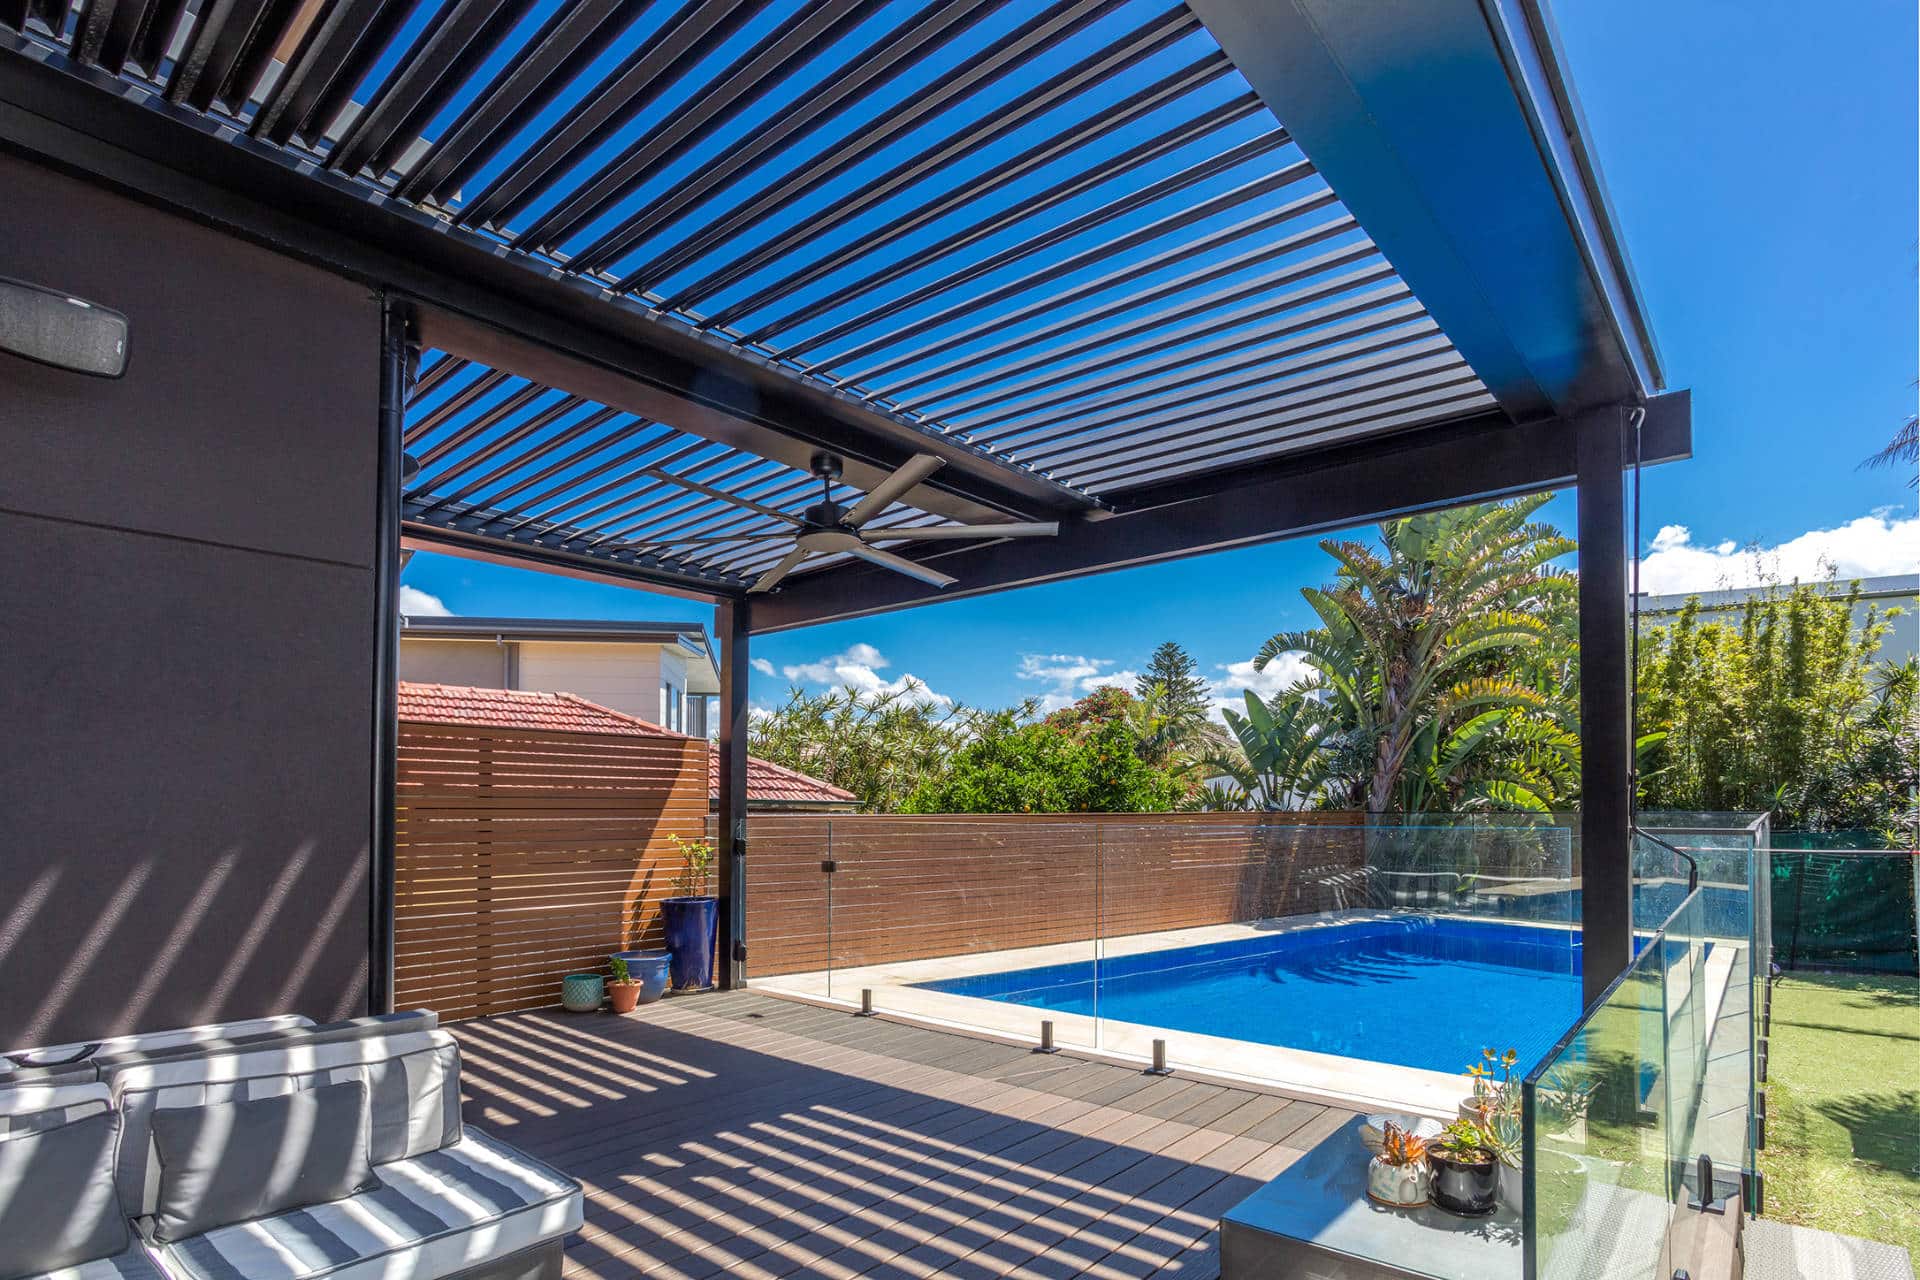 Sandringham pergola with shade created by roof louvres.